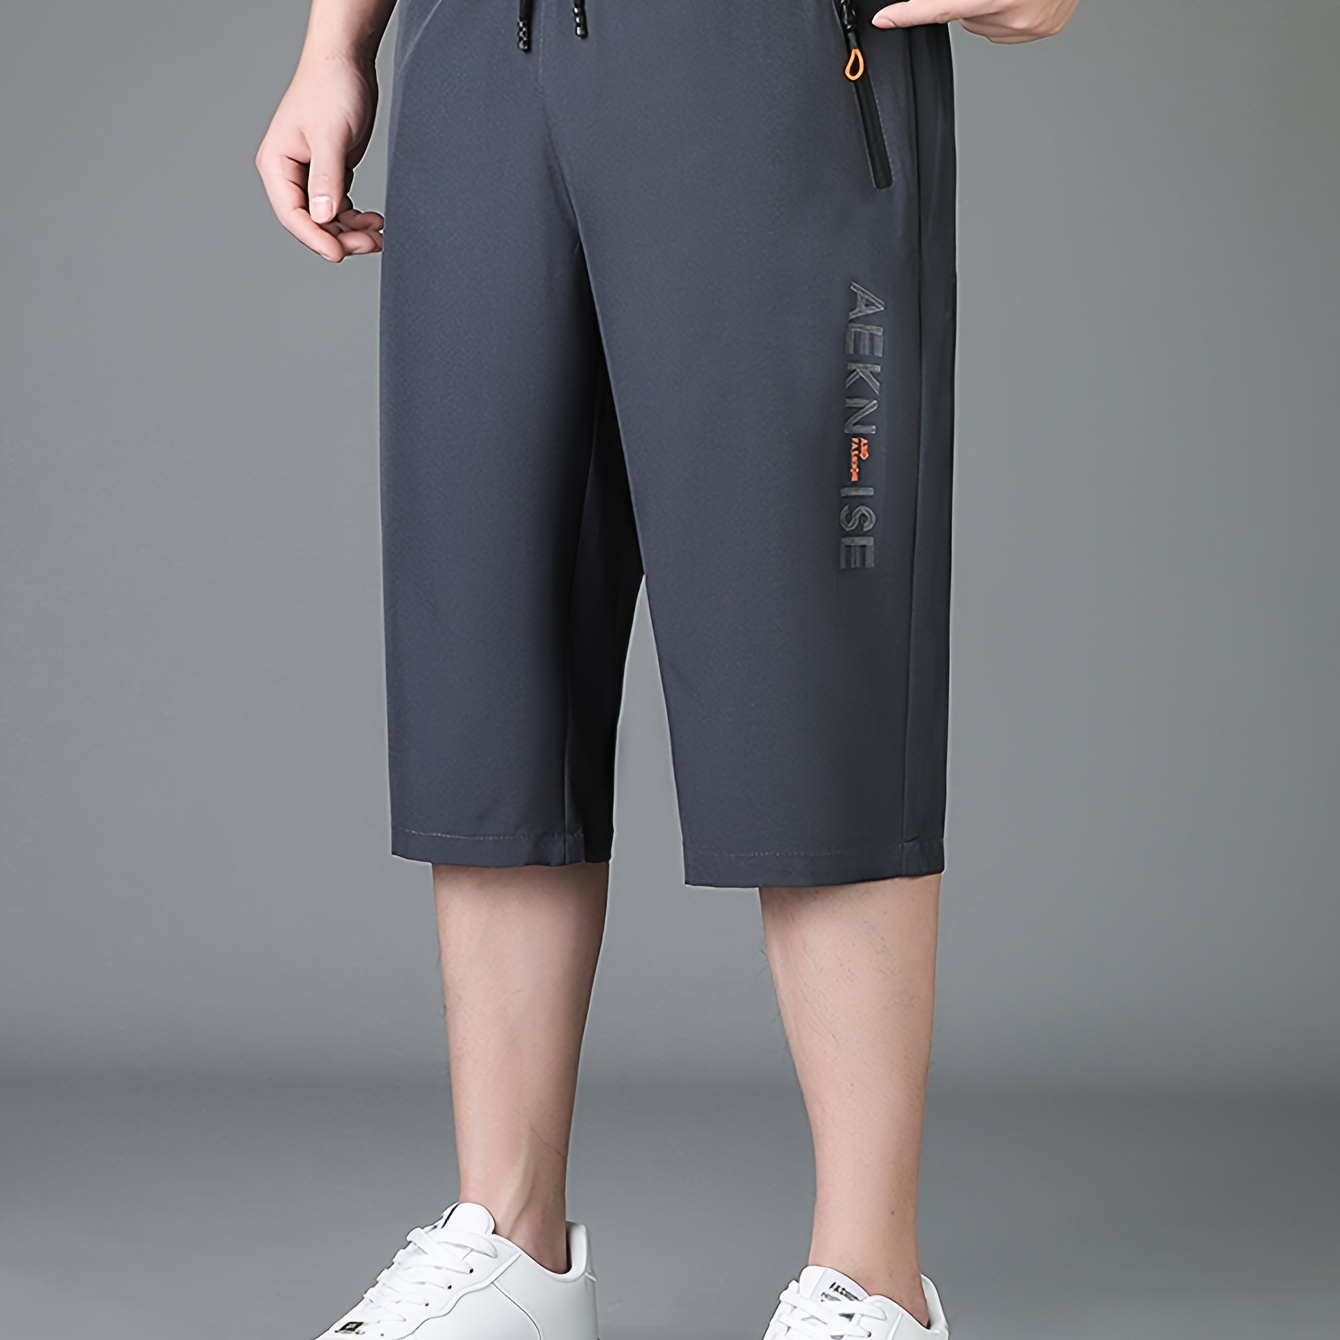 

Men's Letter Print Capri Pants With Drawstring And Zippered Pockets, Quick Dry And Comfy Sports Shorts For Fitness Workout And Running Wear